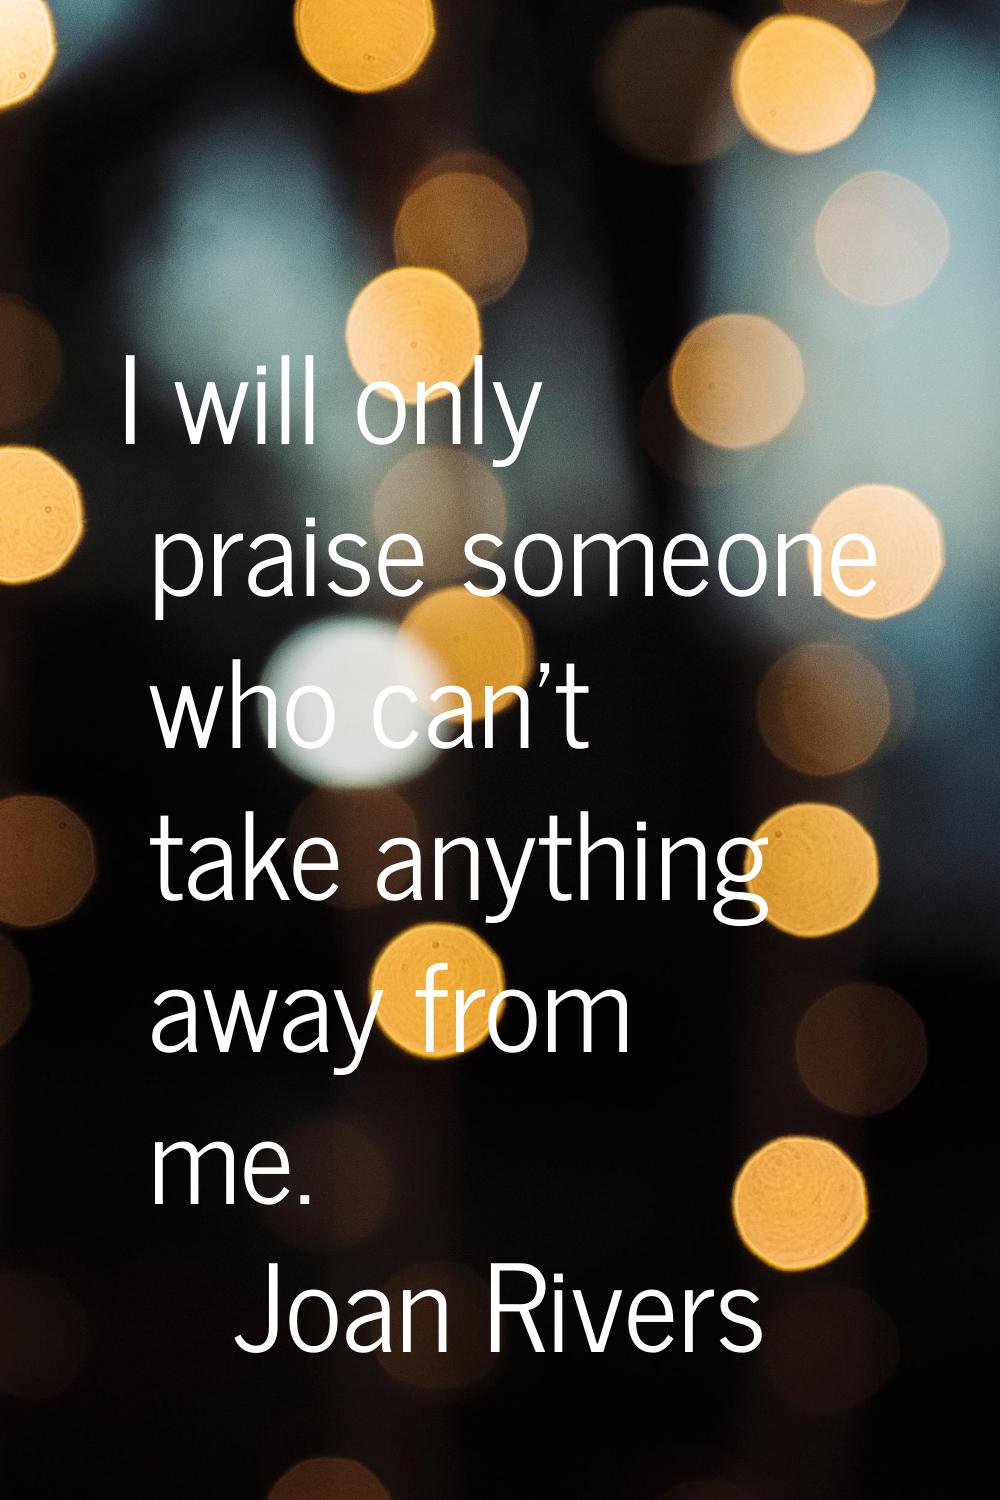 I will only praise someone who can't take anything away from me.